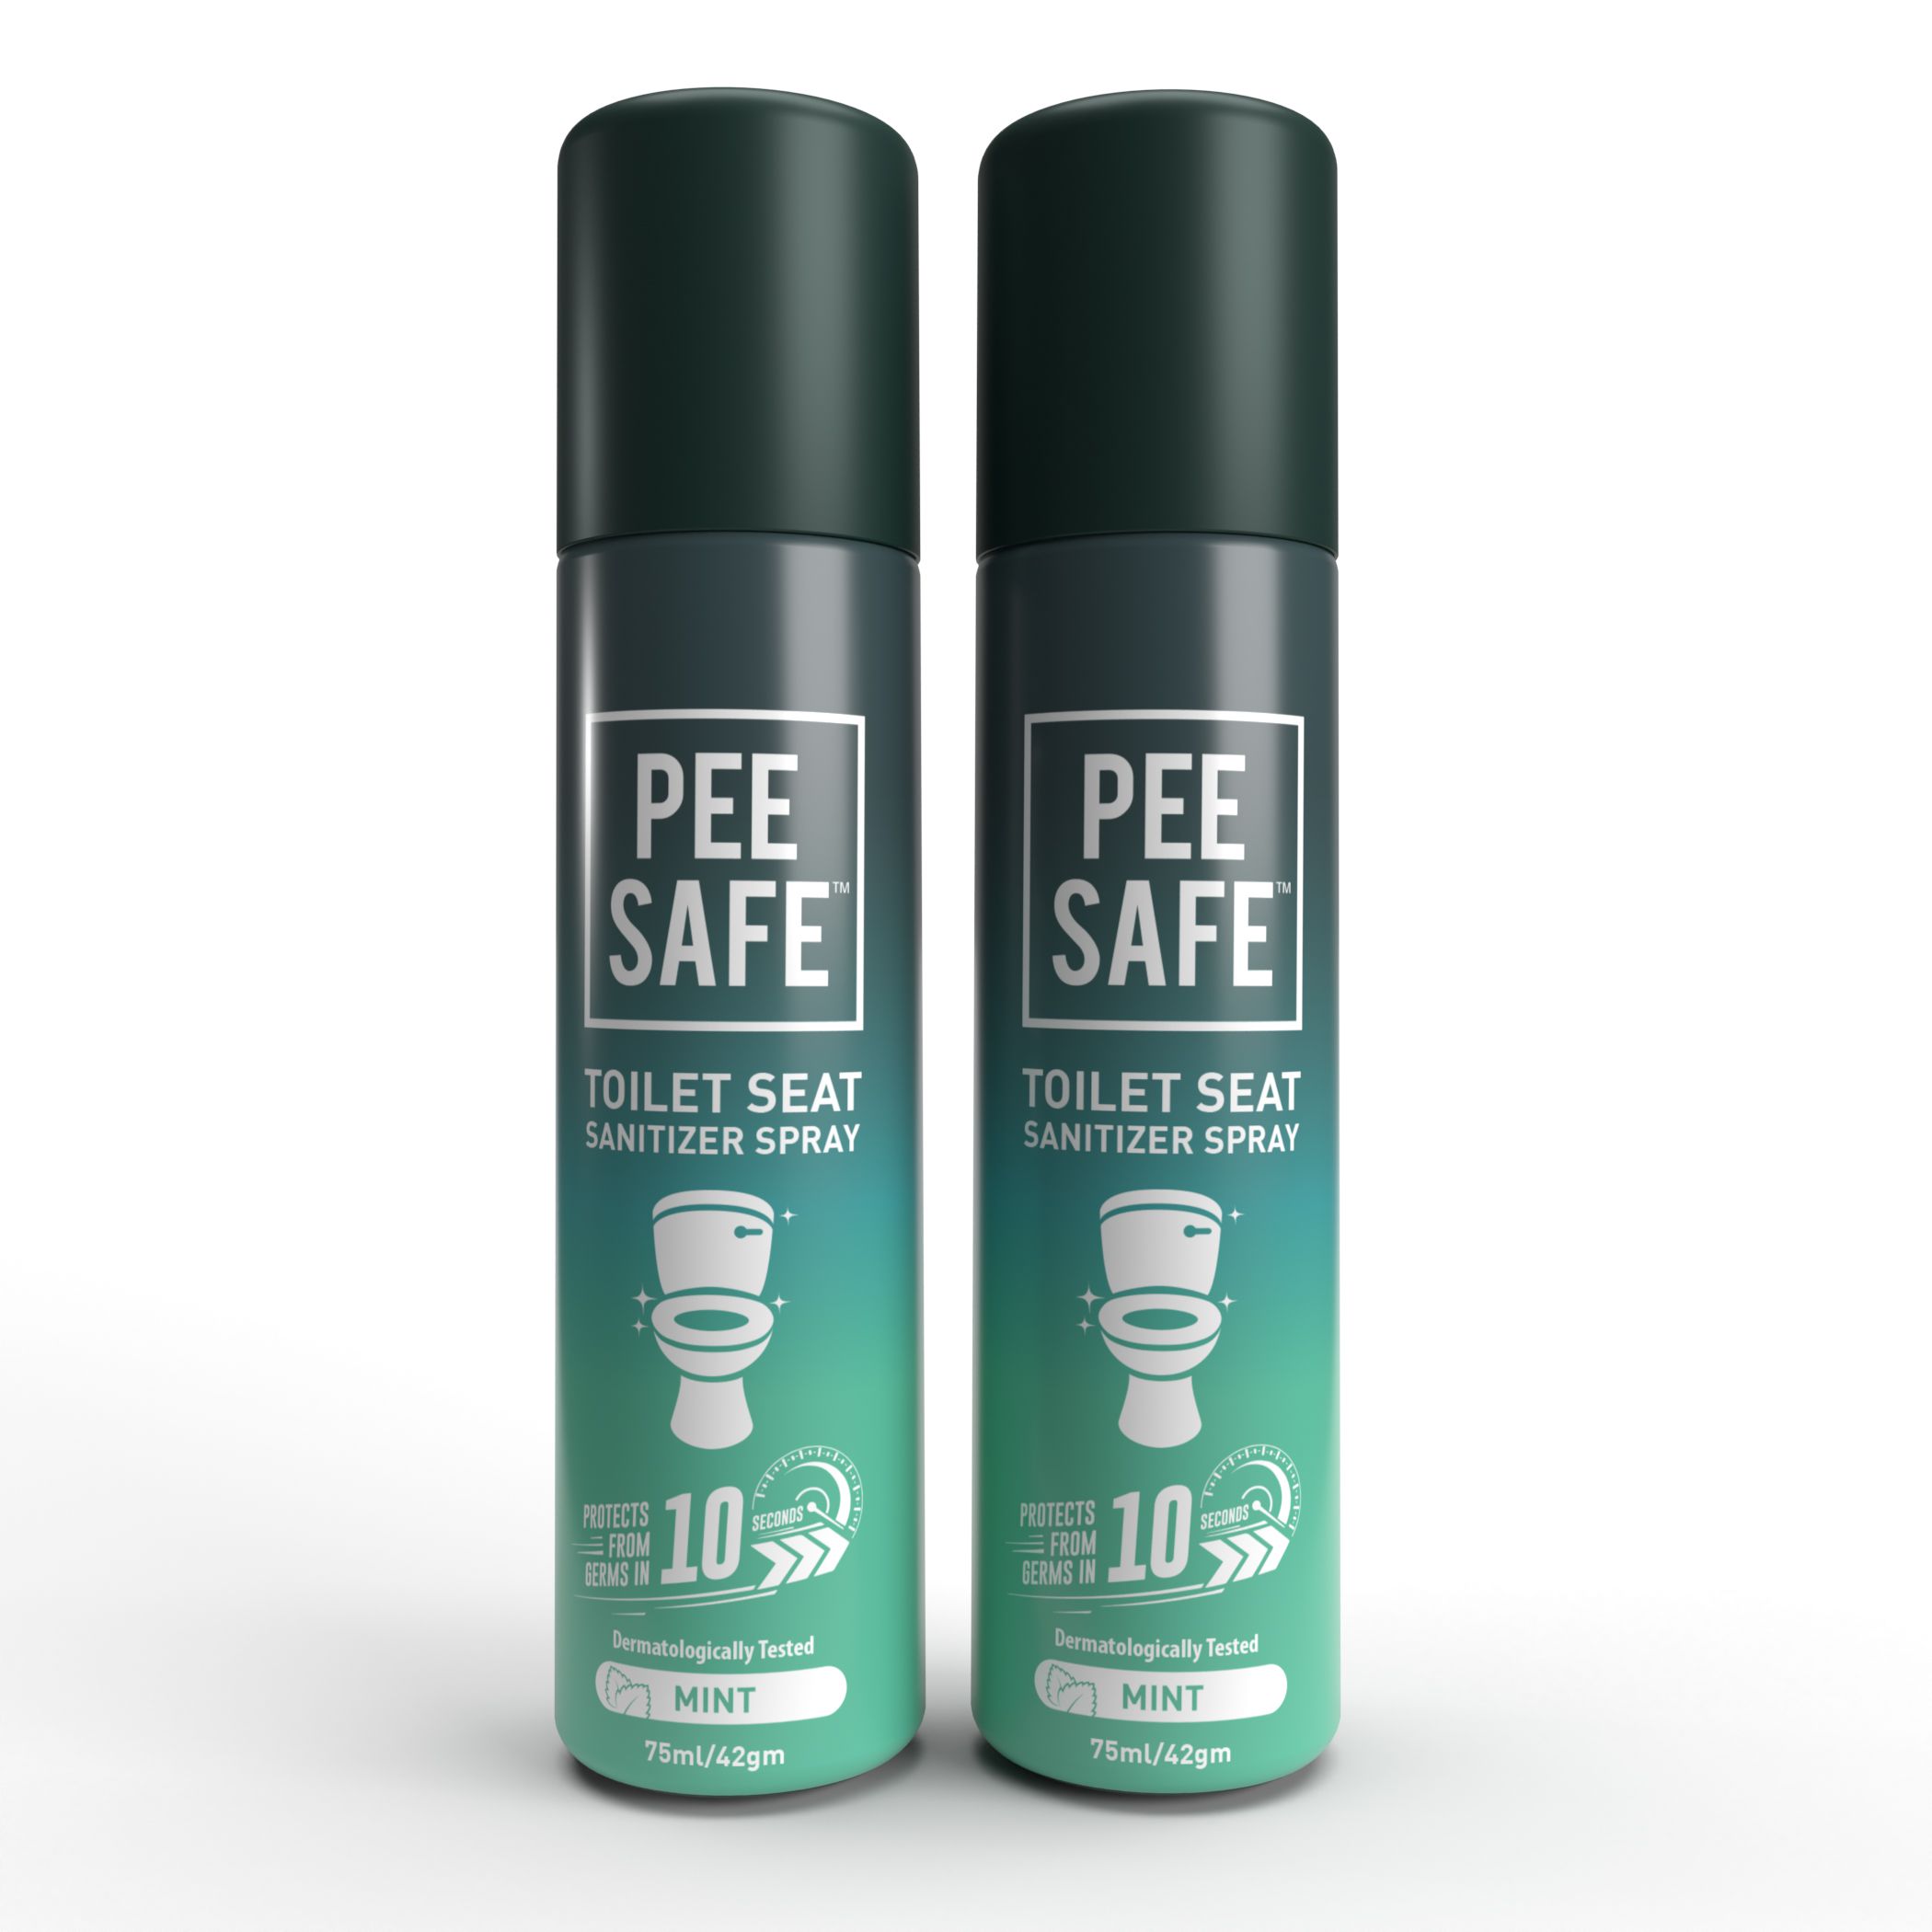 Pee Safe Toilet Seat Sanitizer Spray (75ml - Pack Of 2) - Mint| Reduces The Risk Of UTI & Other Infections | Kills 99.9% Germs & Travel Friendly | Anti Odour, Deodorizer